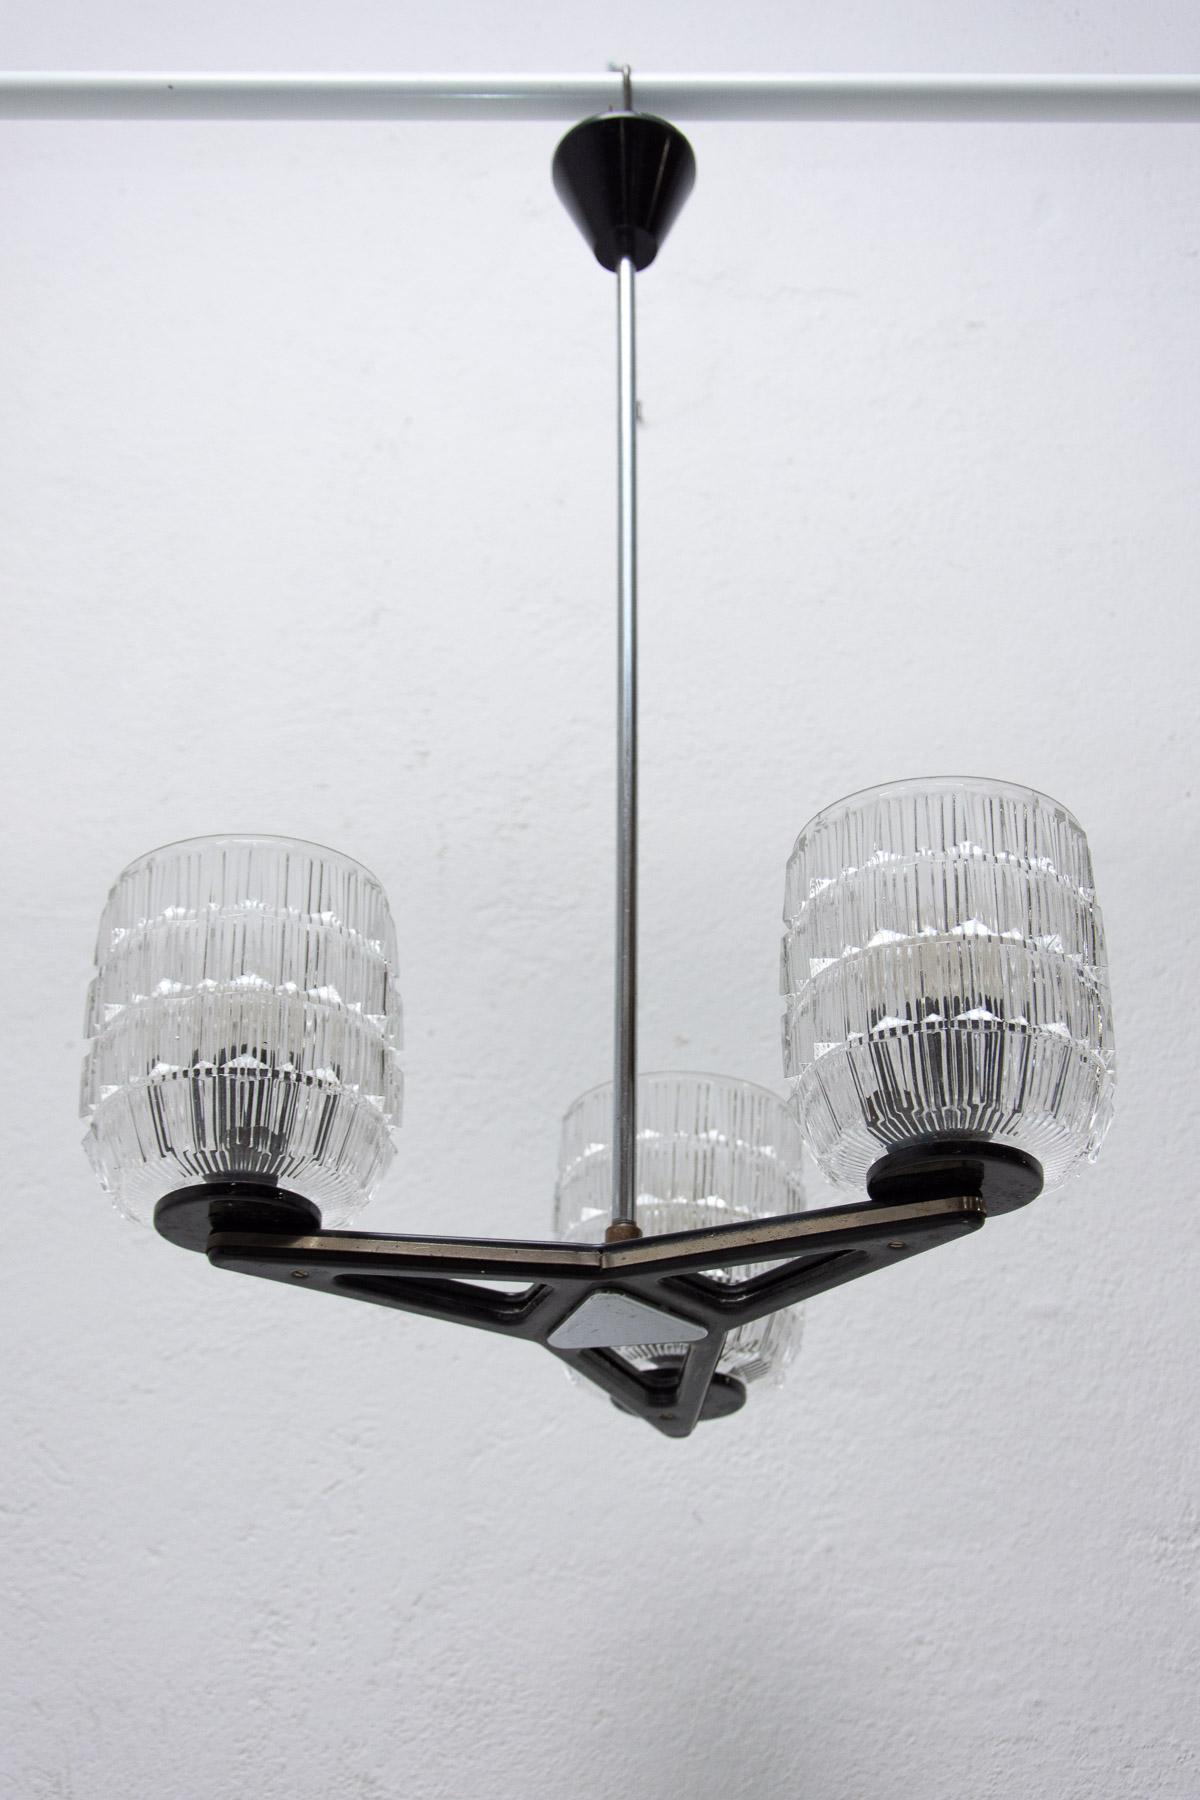 This chandelier was made in the 1970´s in the former Czechoslovakia by LIDOKOV company.

It is made of cut glass, chrome and metal.

Original fully functional wiring, cleaned, in good Vintage condition.

Works with three E27 bulb.

